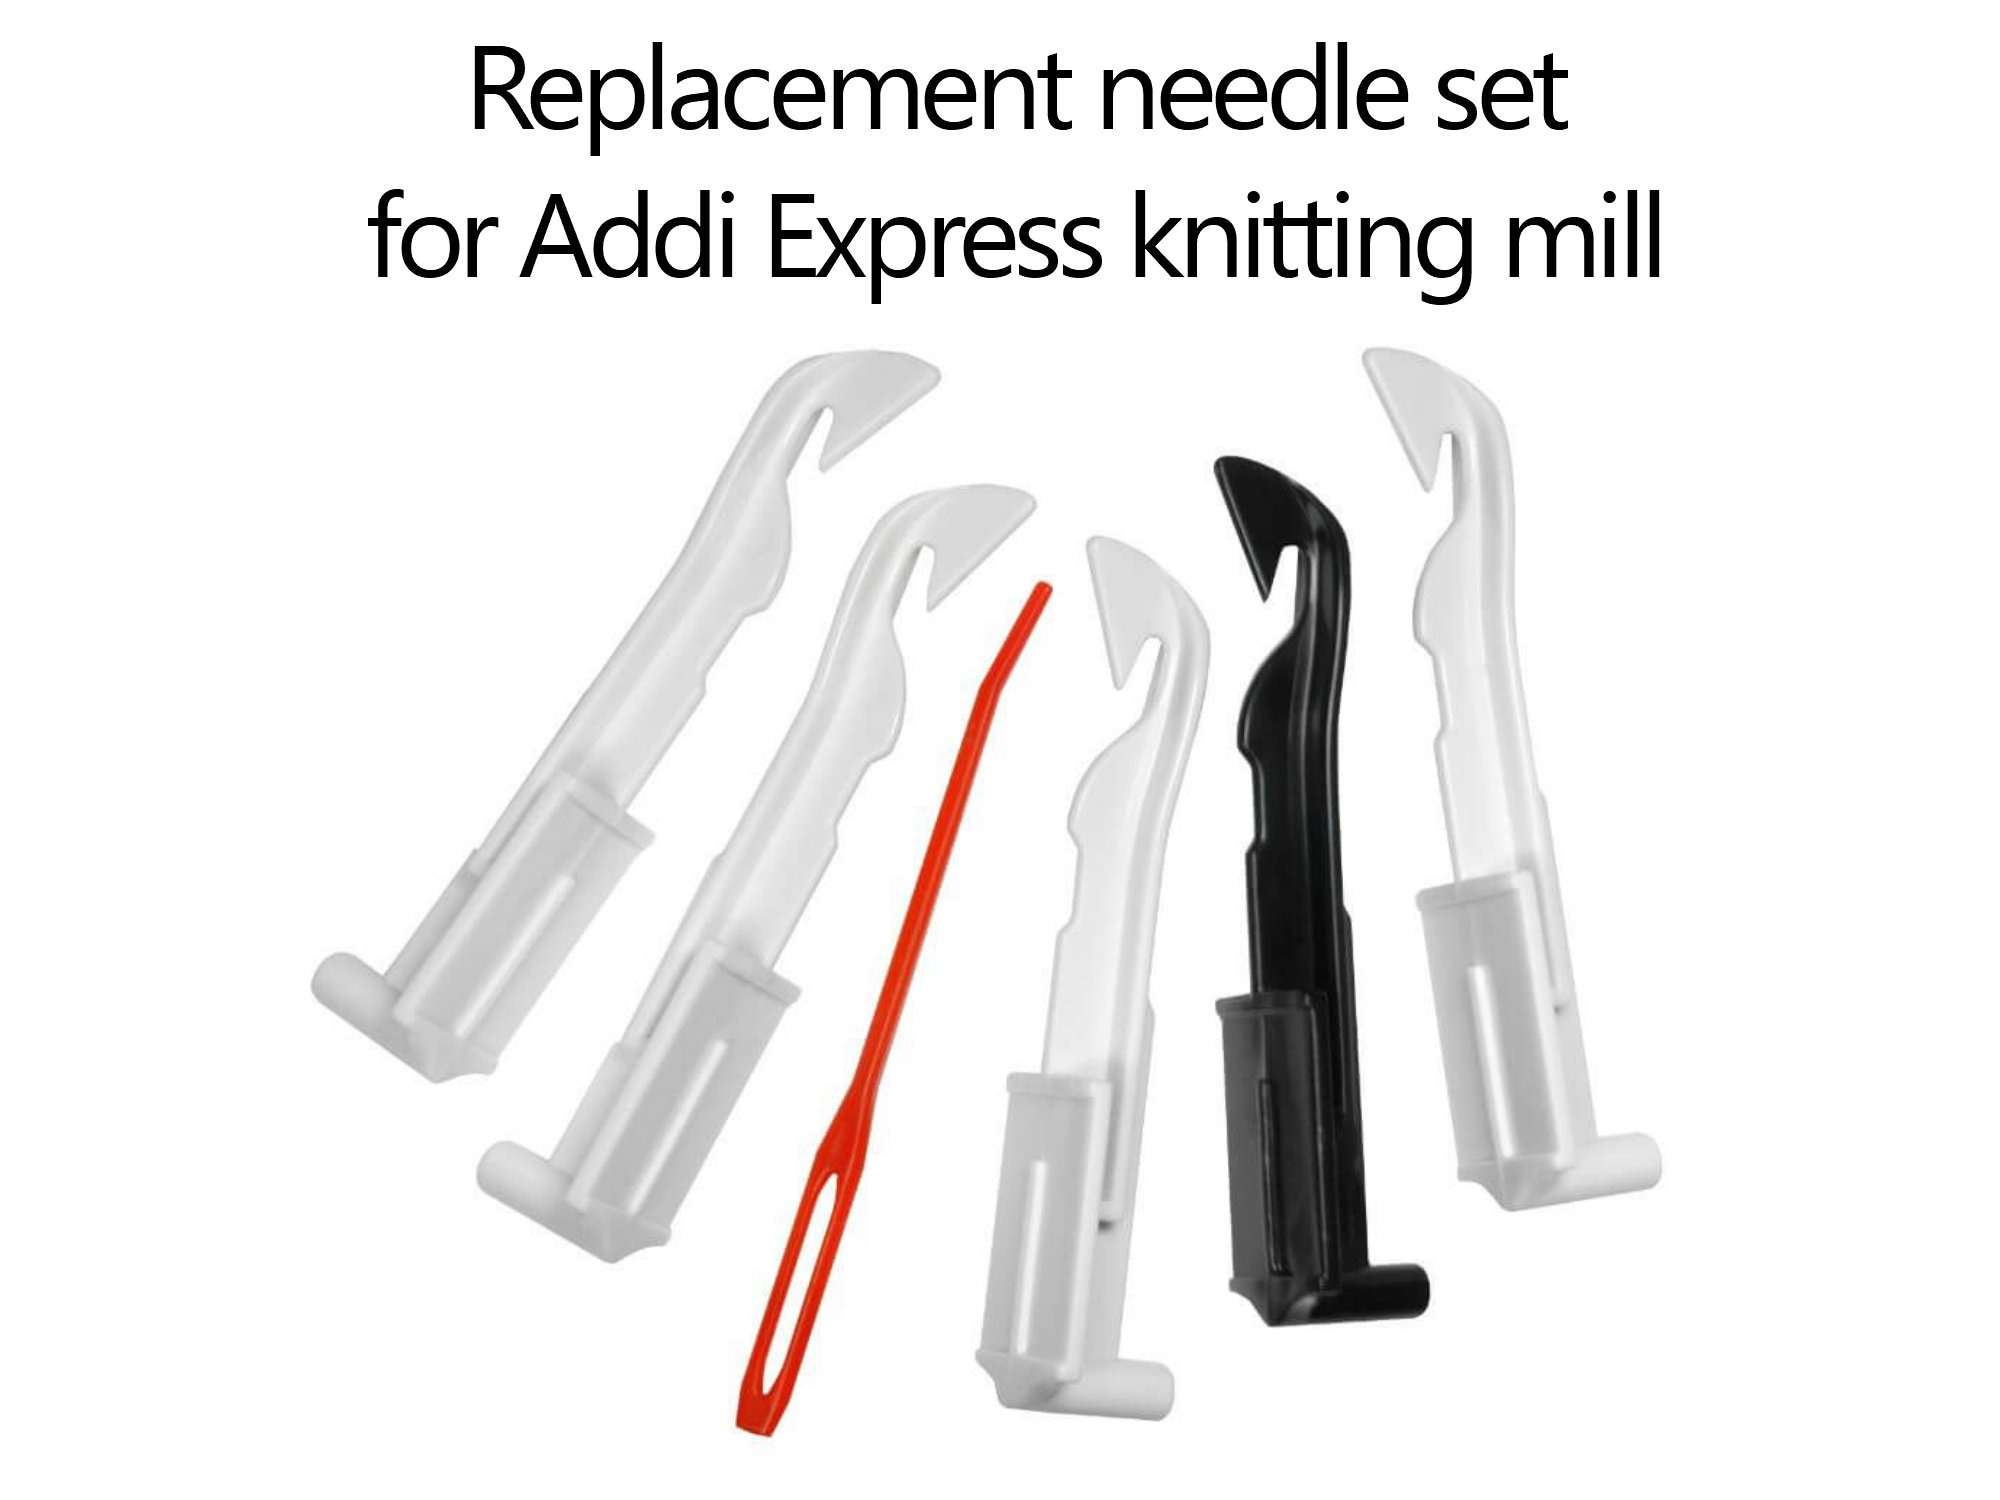 addi Egg - Professional Little Knitting Machine with 6 Needles for